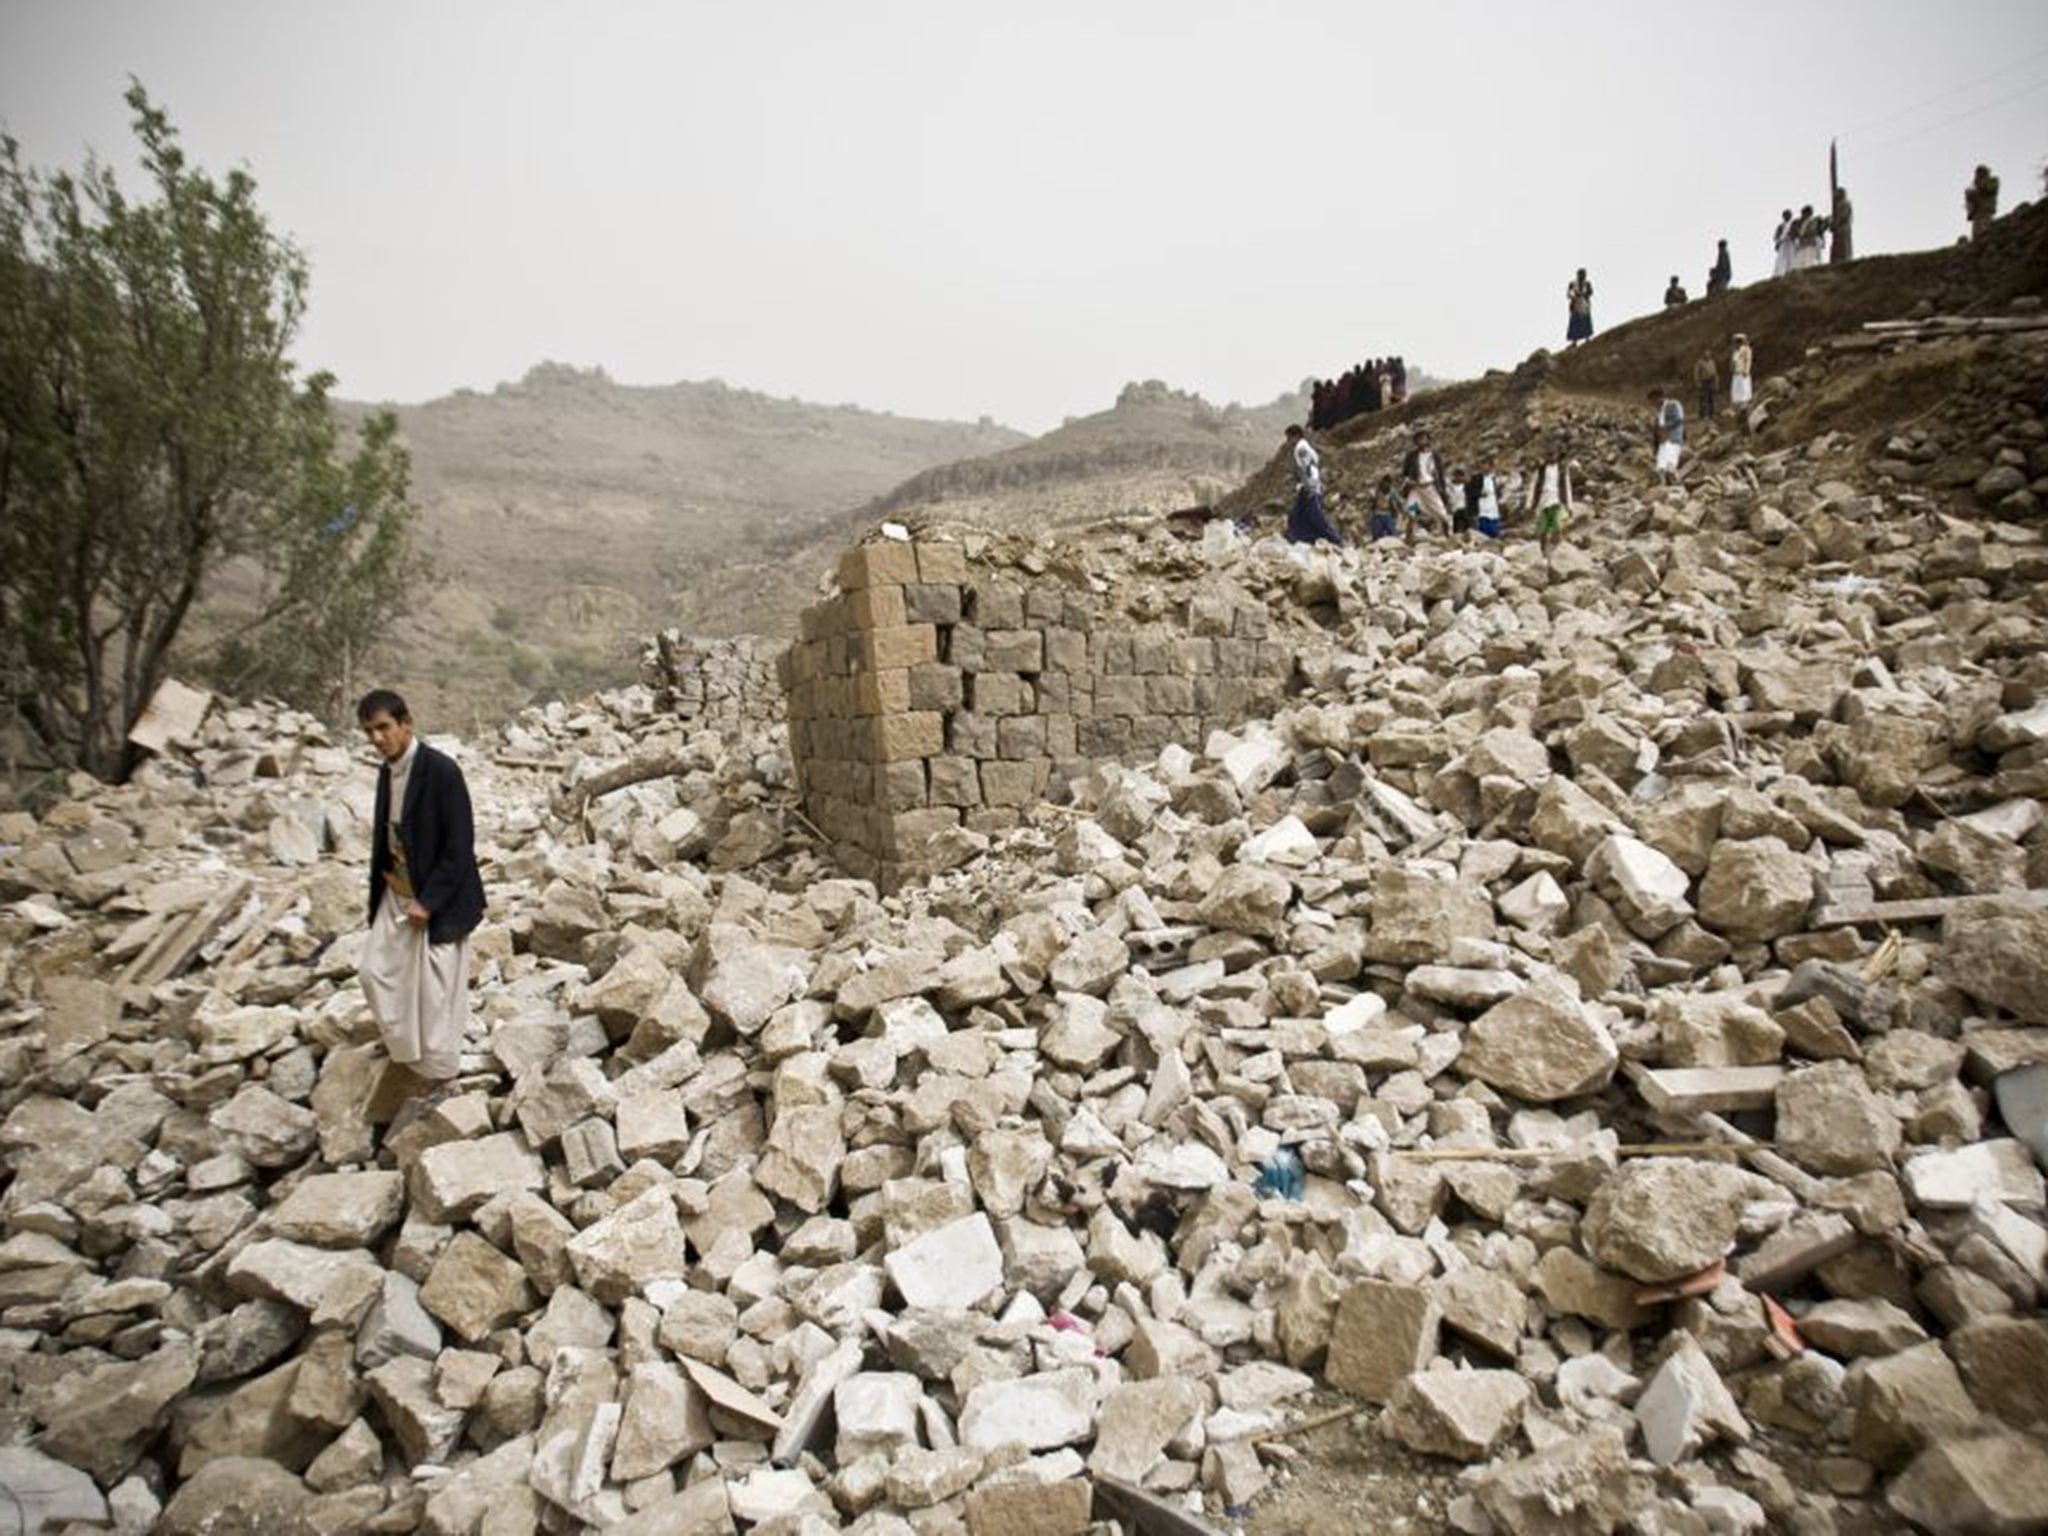 Saudi-led air strikes over the past 12 days have failed to stop the Houthi advance across Yemen towards Aden